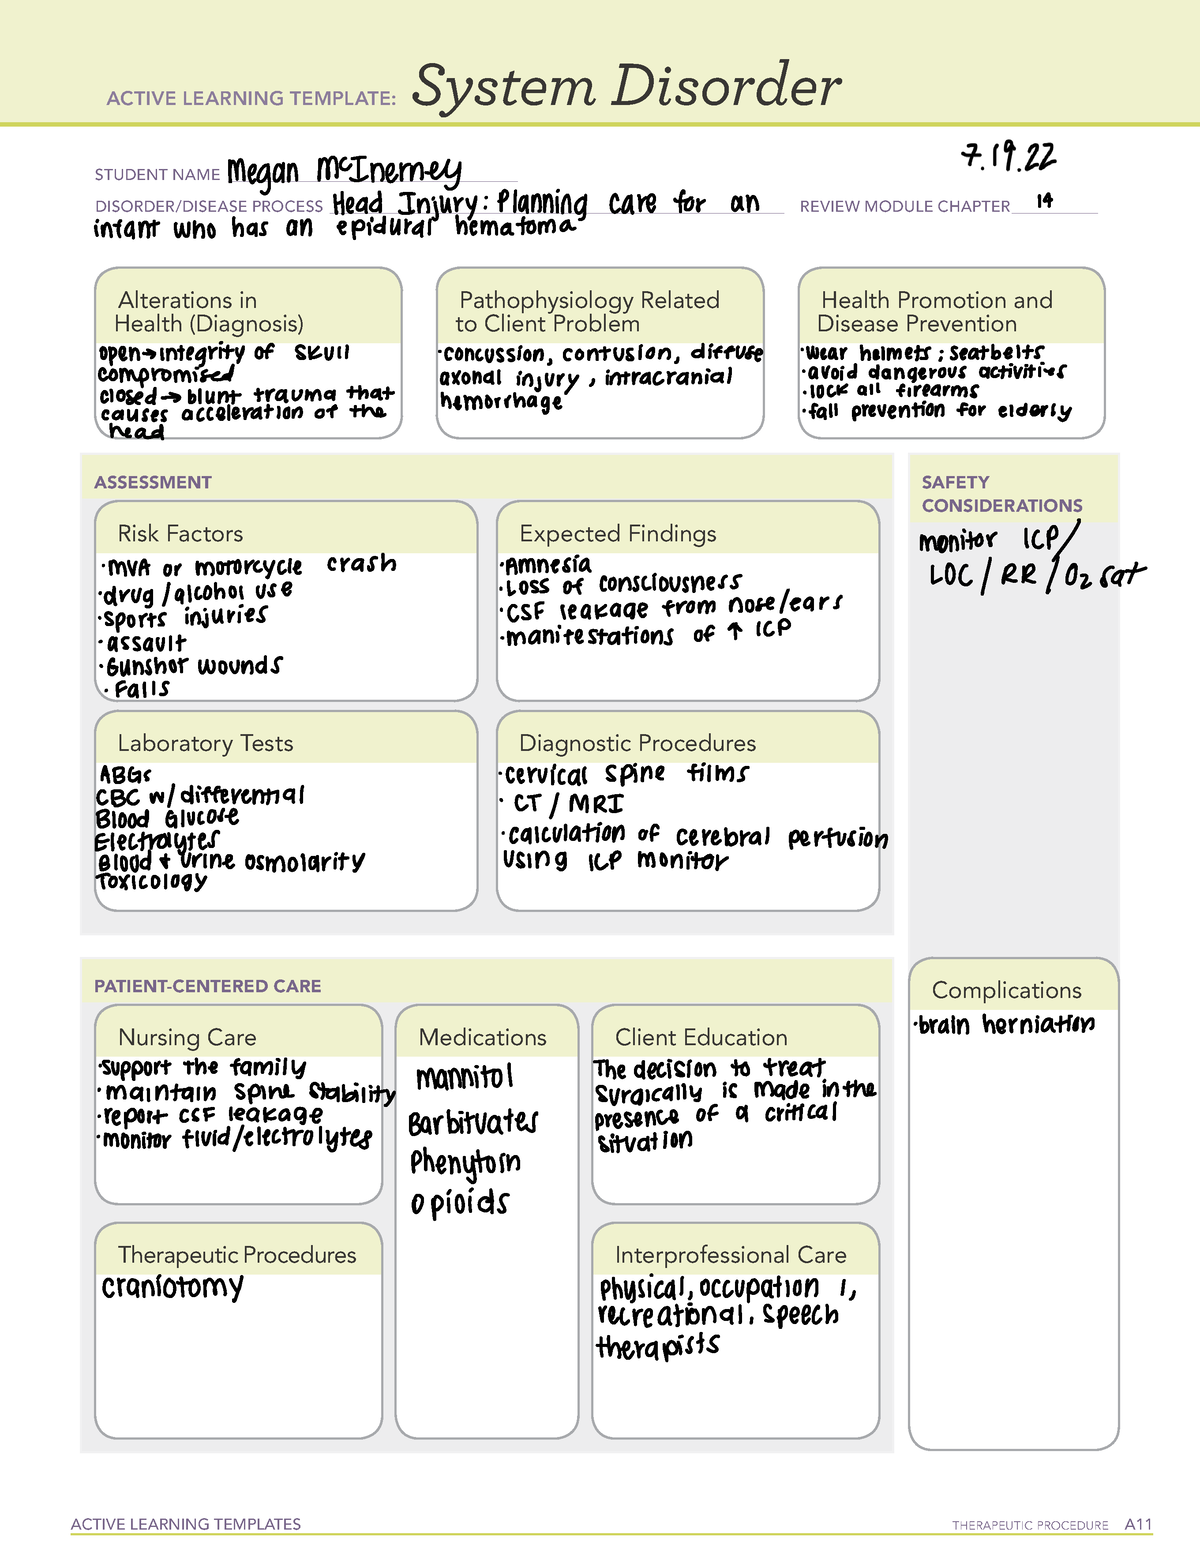 peds-practice-a-remediation-ati-active-learning-templates-system